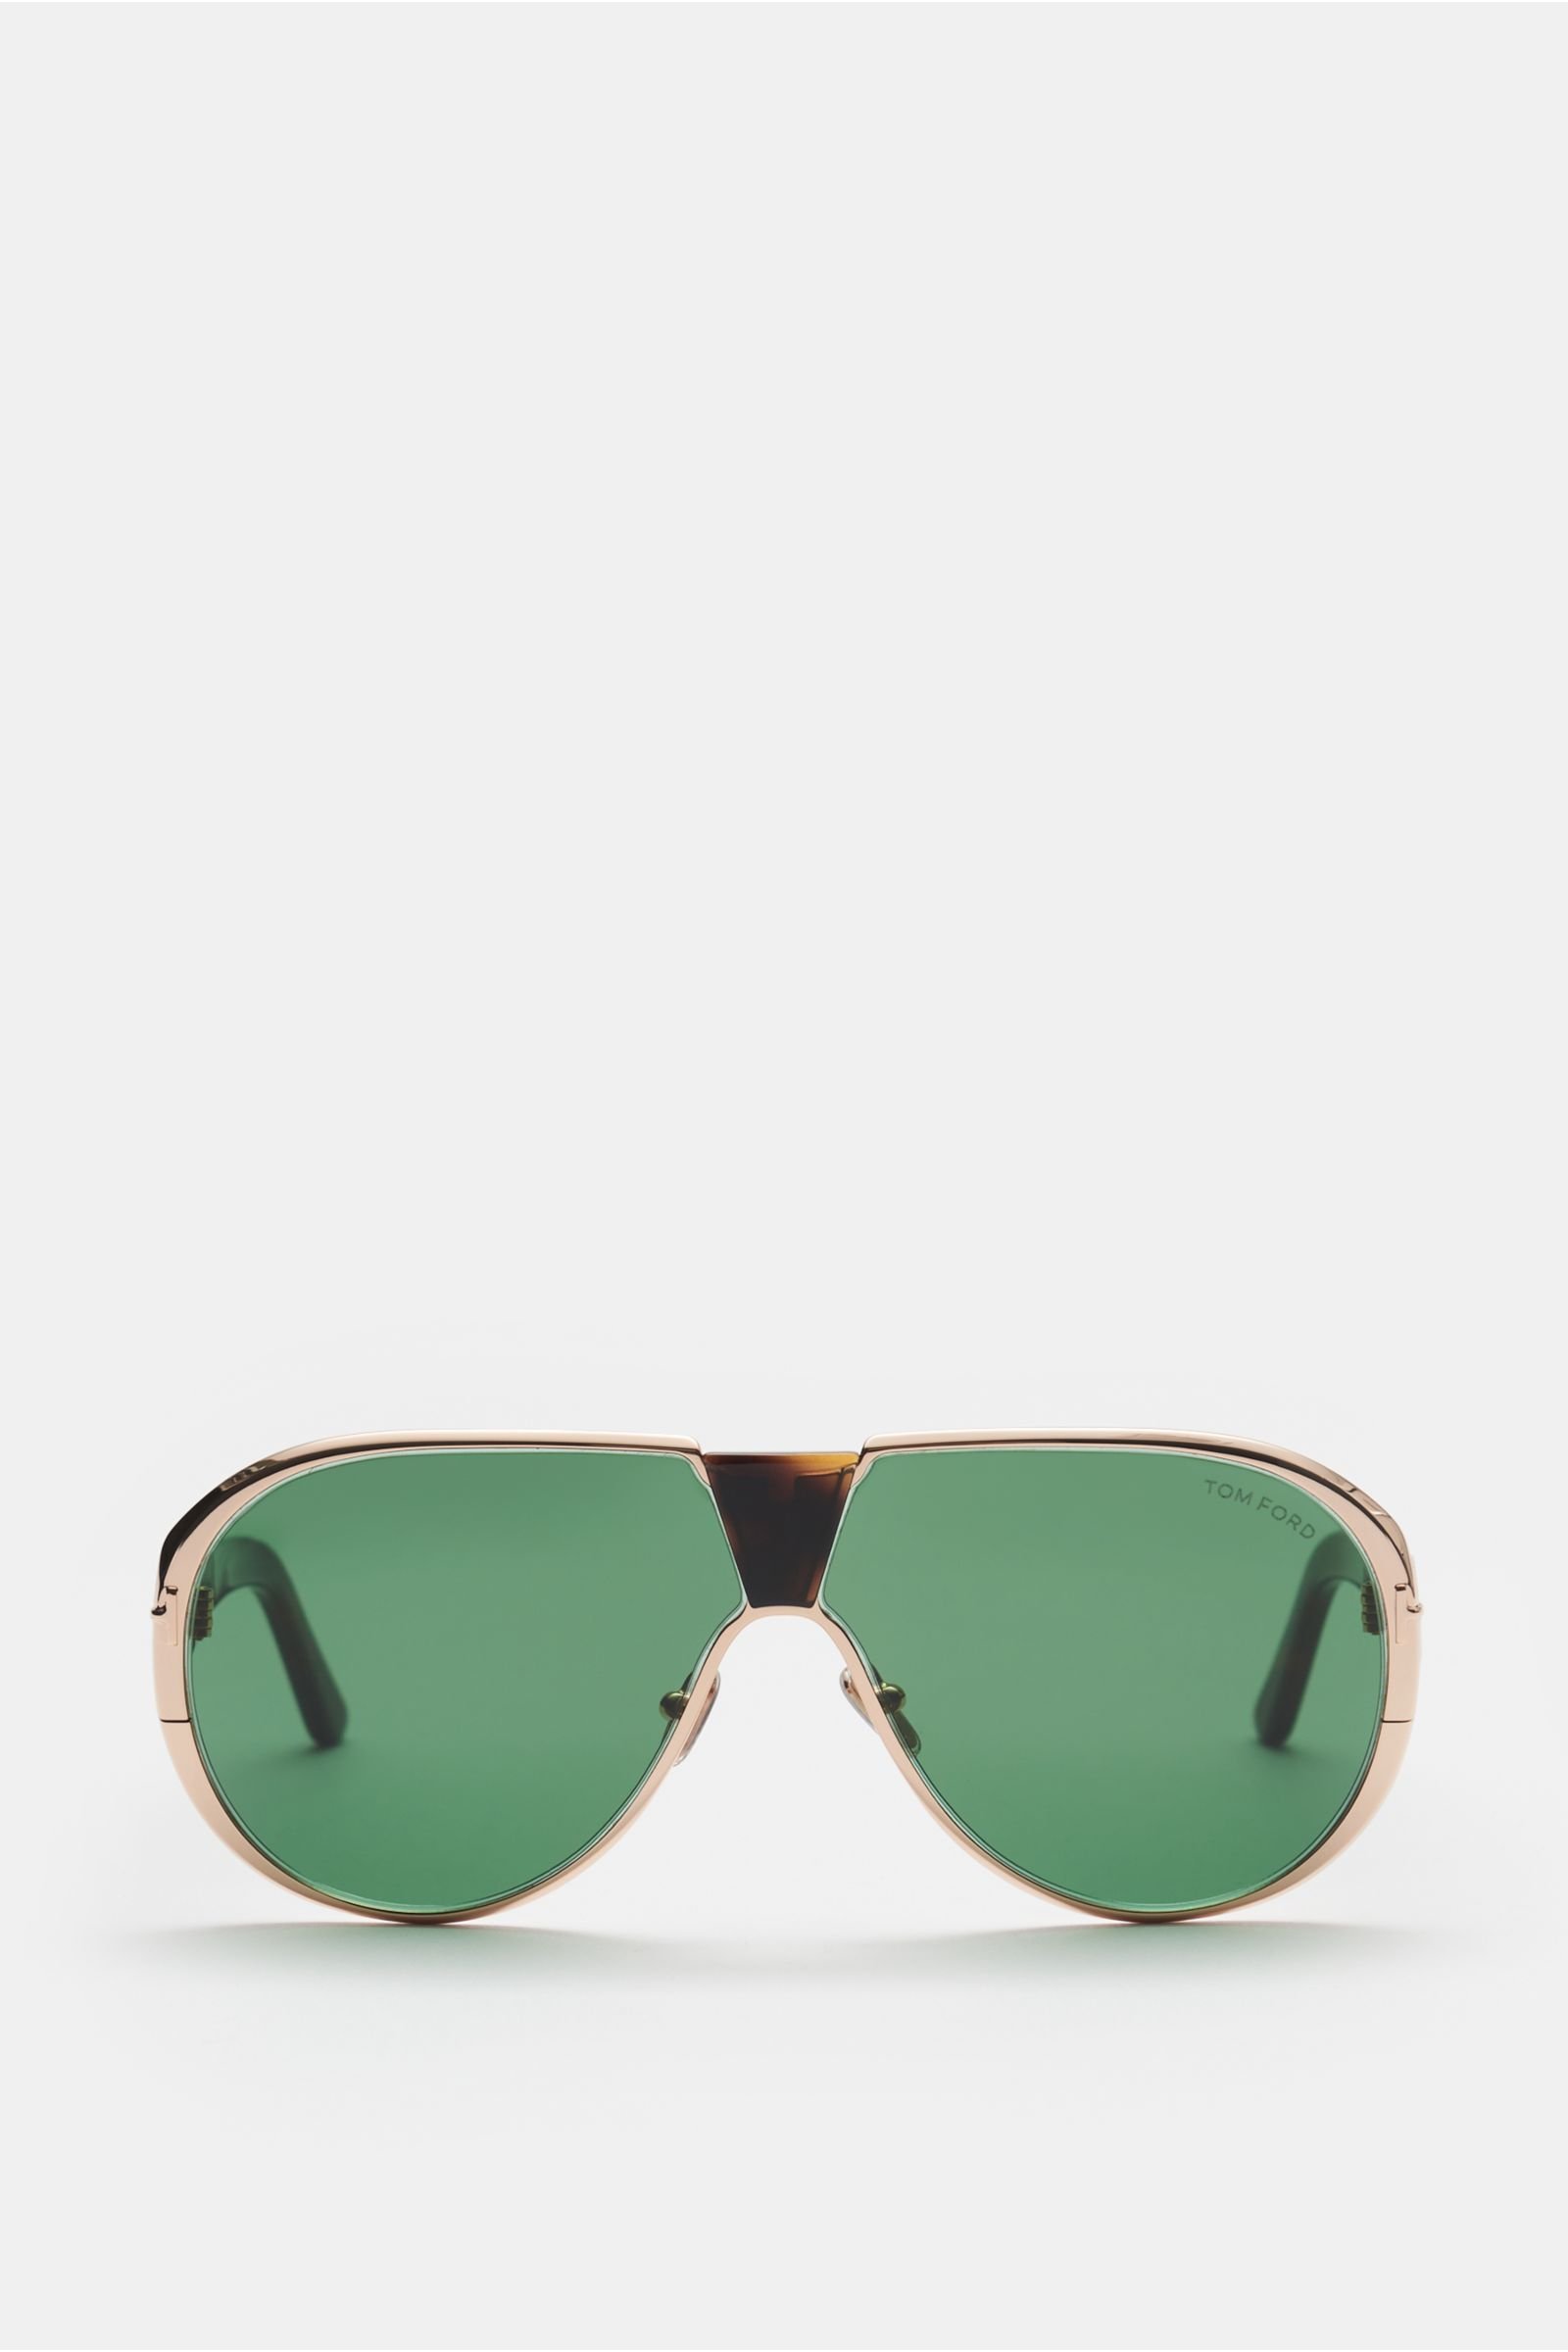 Sunglasses 'Vincenzo' silver/brown patterned/green